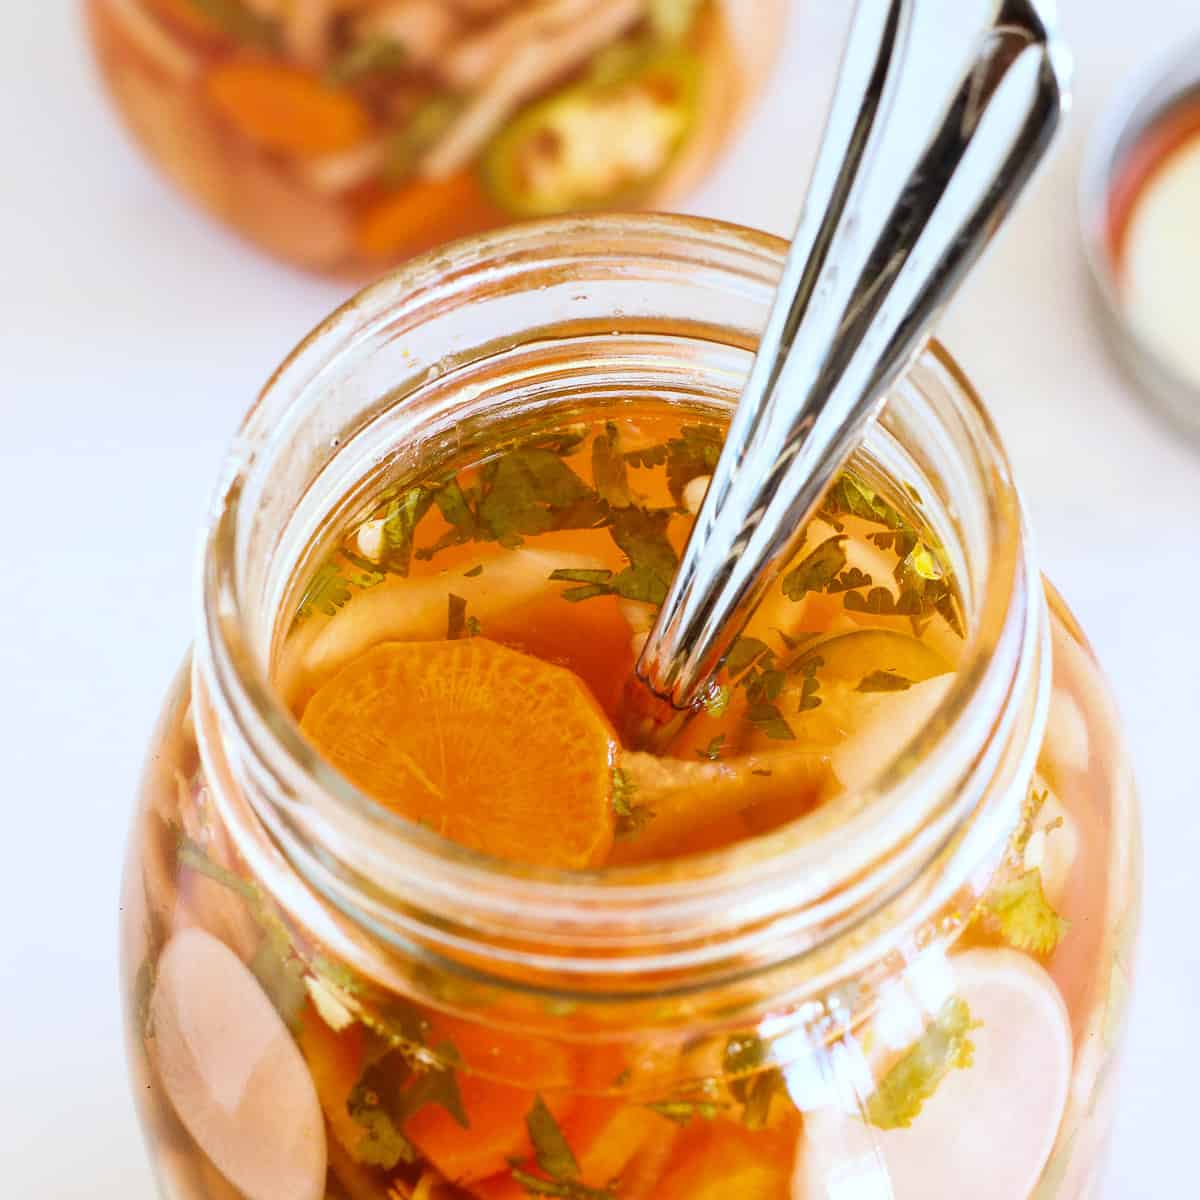 Looking into a jar of Mexican pickled vegetables. A spoon is in the jar.